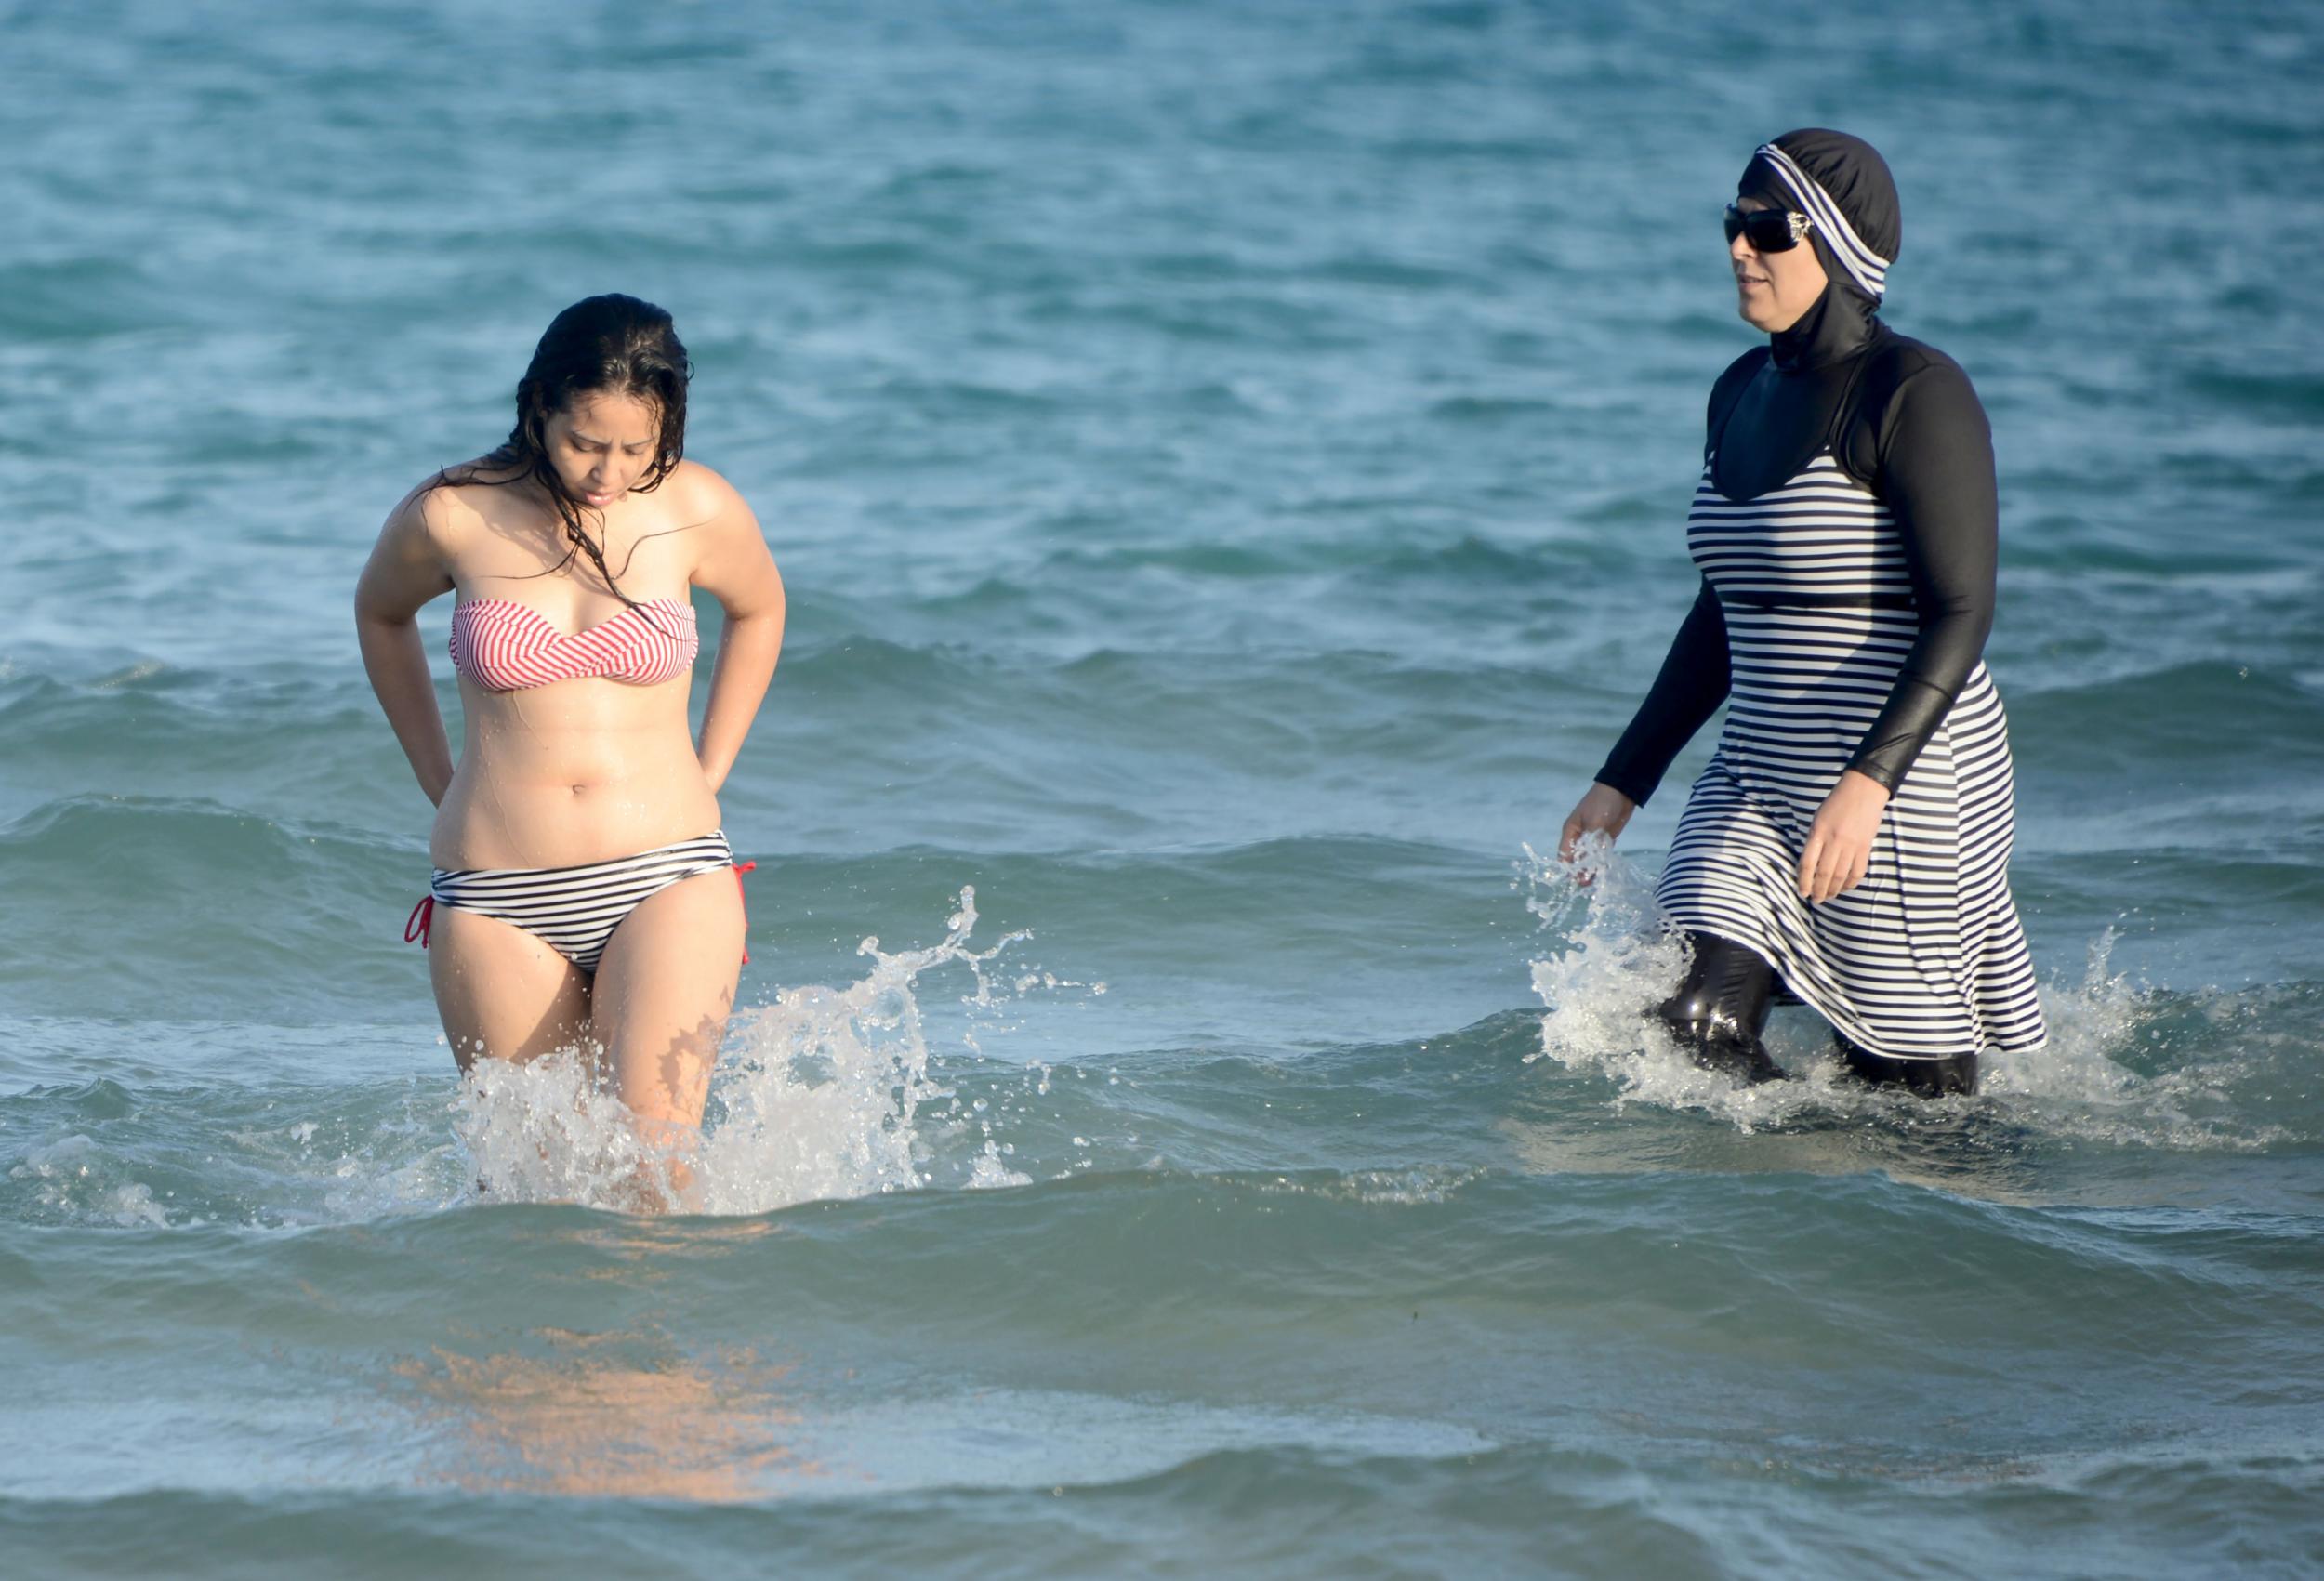 Enforced hijab in Iran and burkini ban in France are both about one issue only, says My Stealthy Freedom founder The Independent The Independent pic